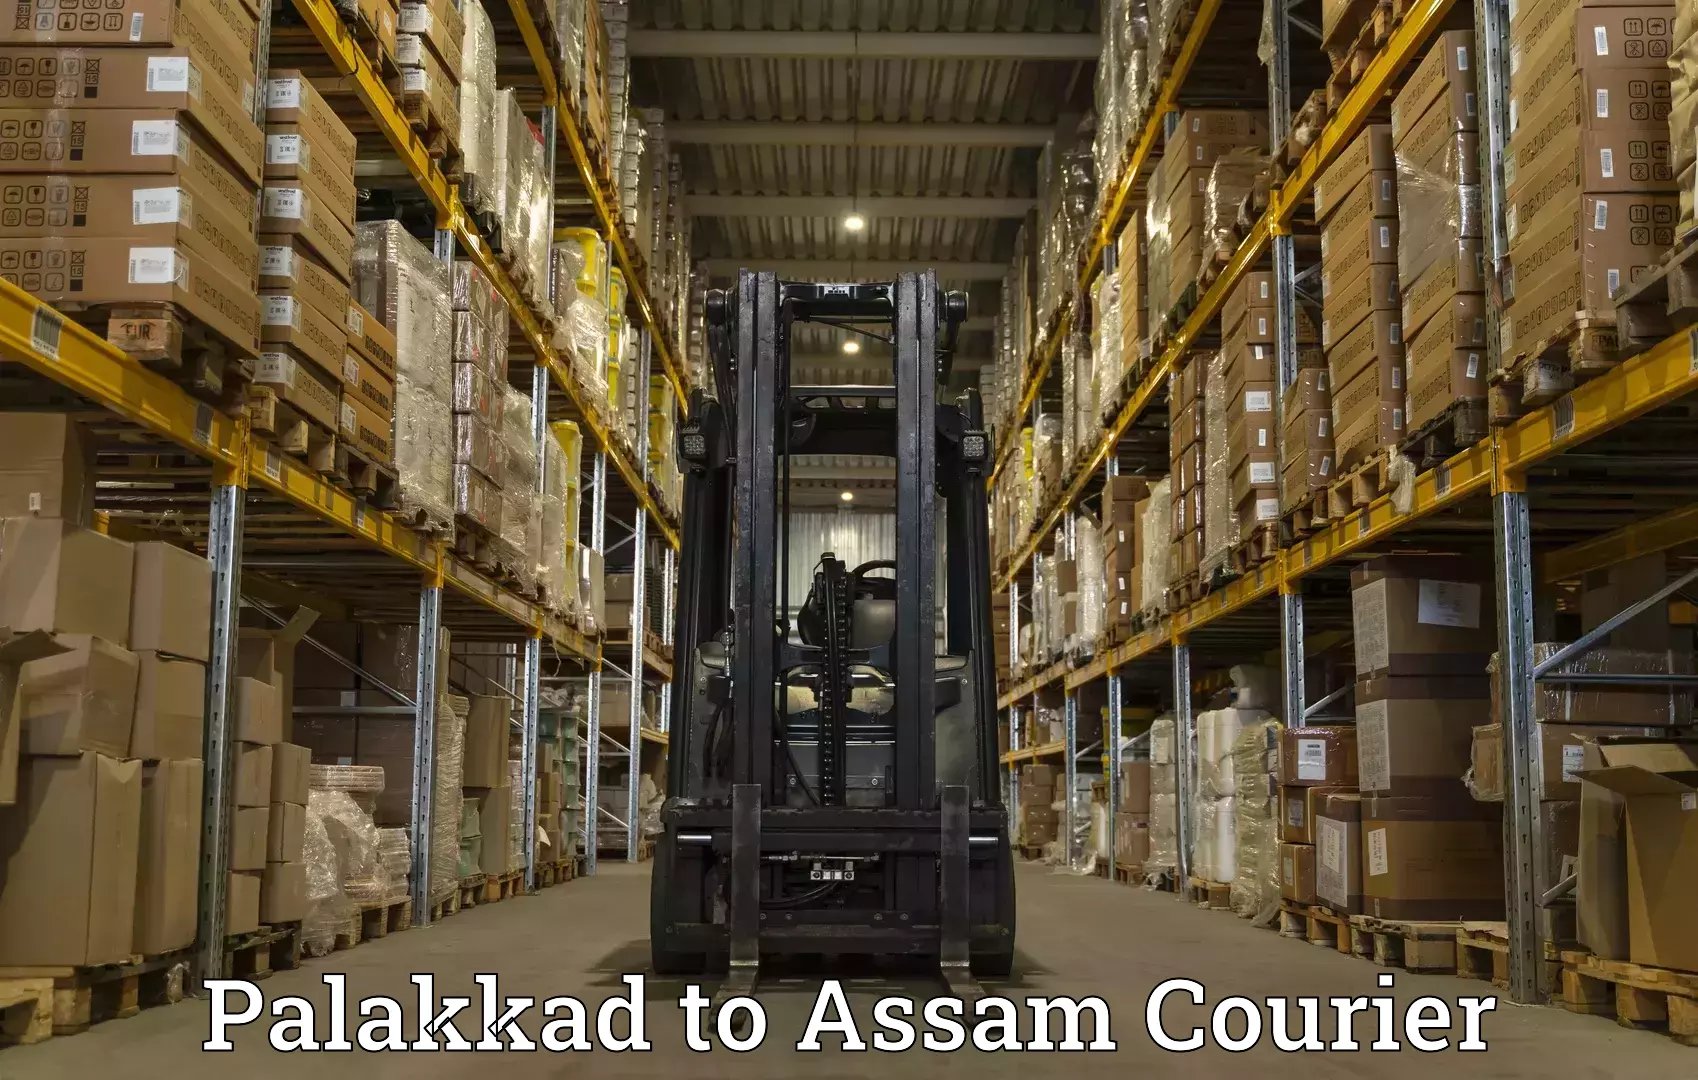 Medical delivery services Palakkad to Lala Assam